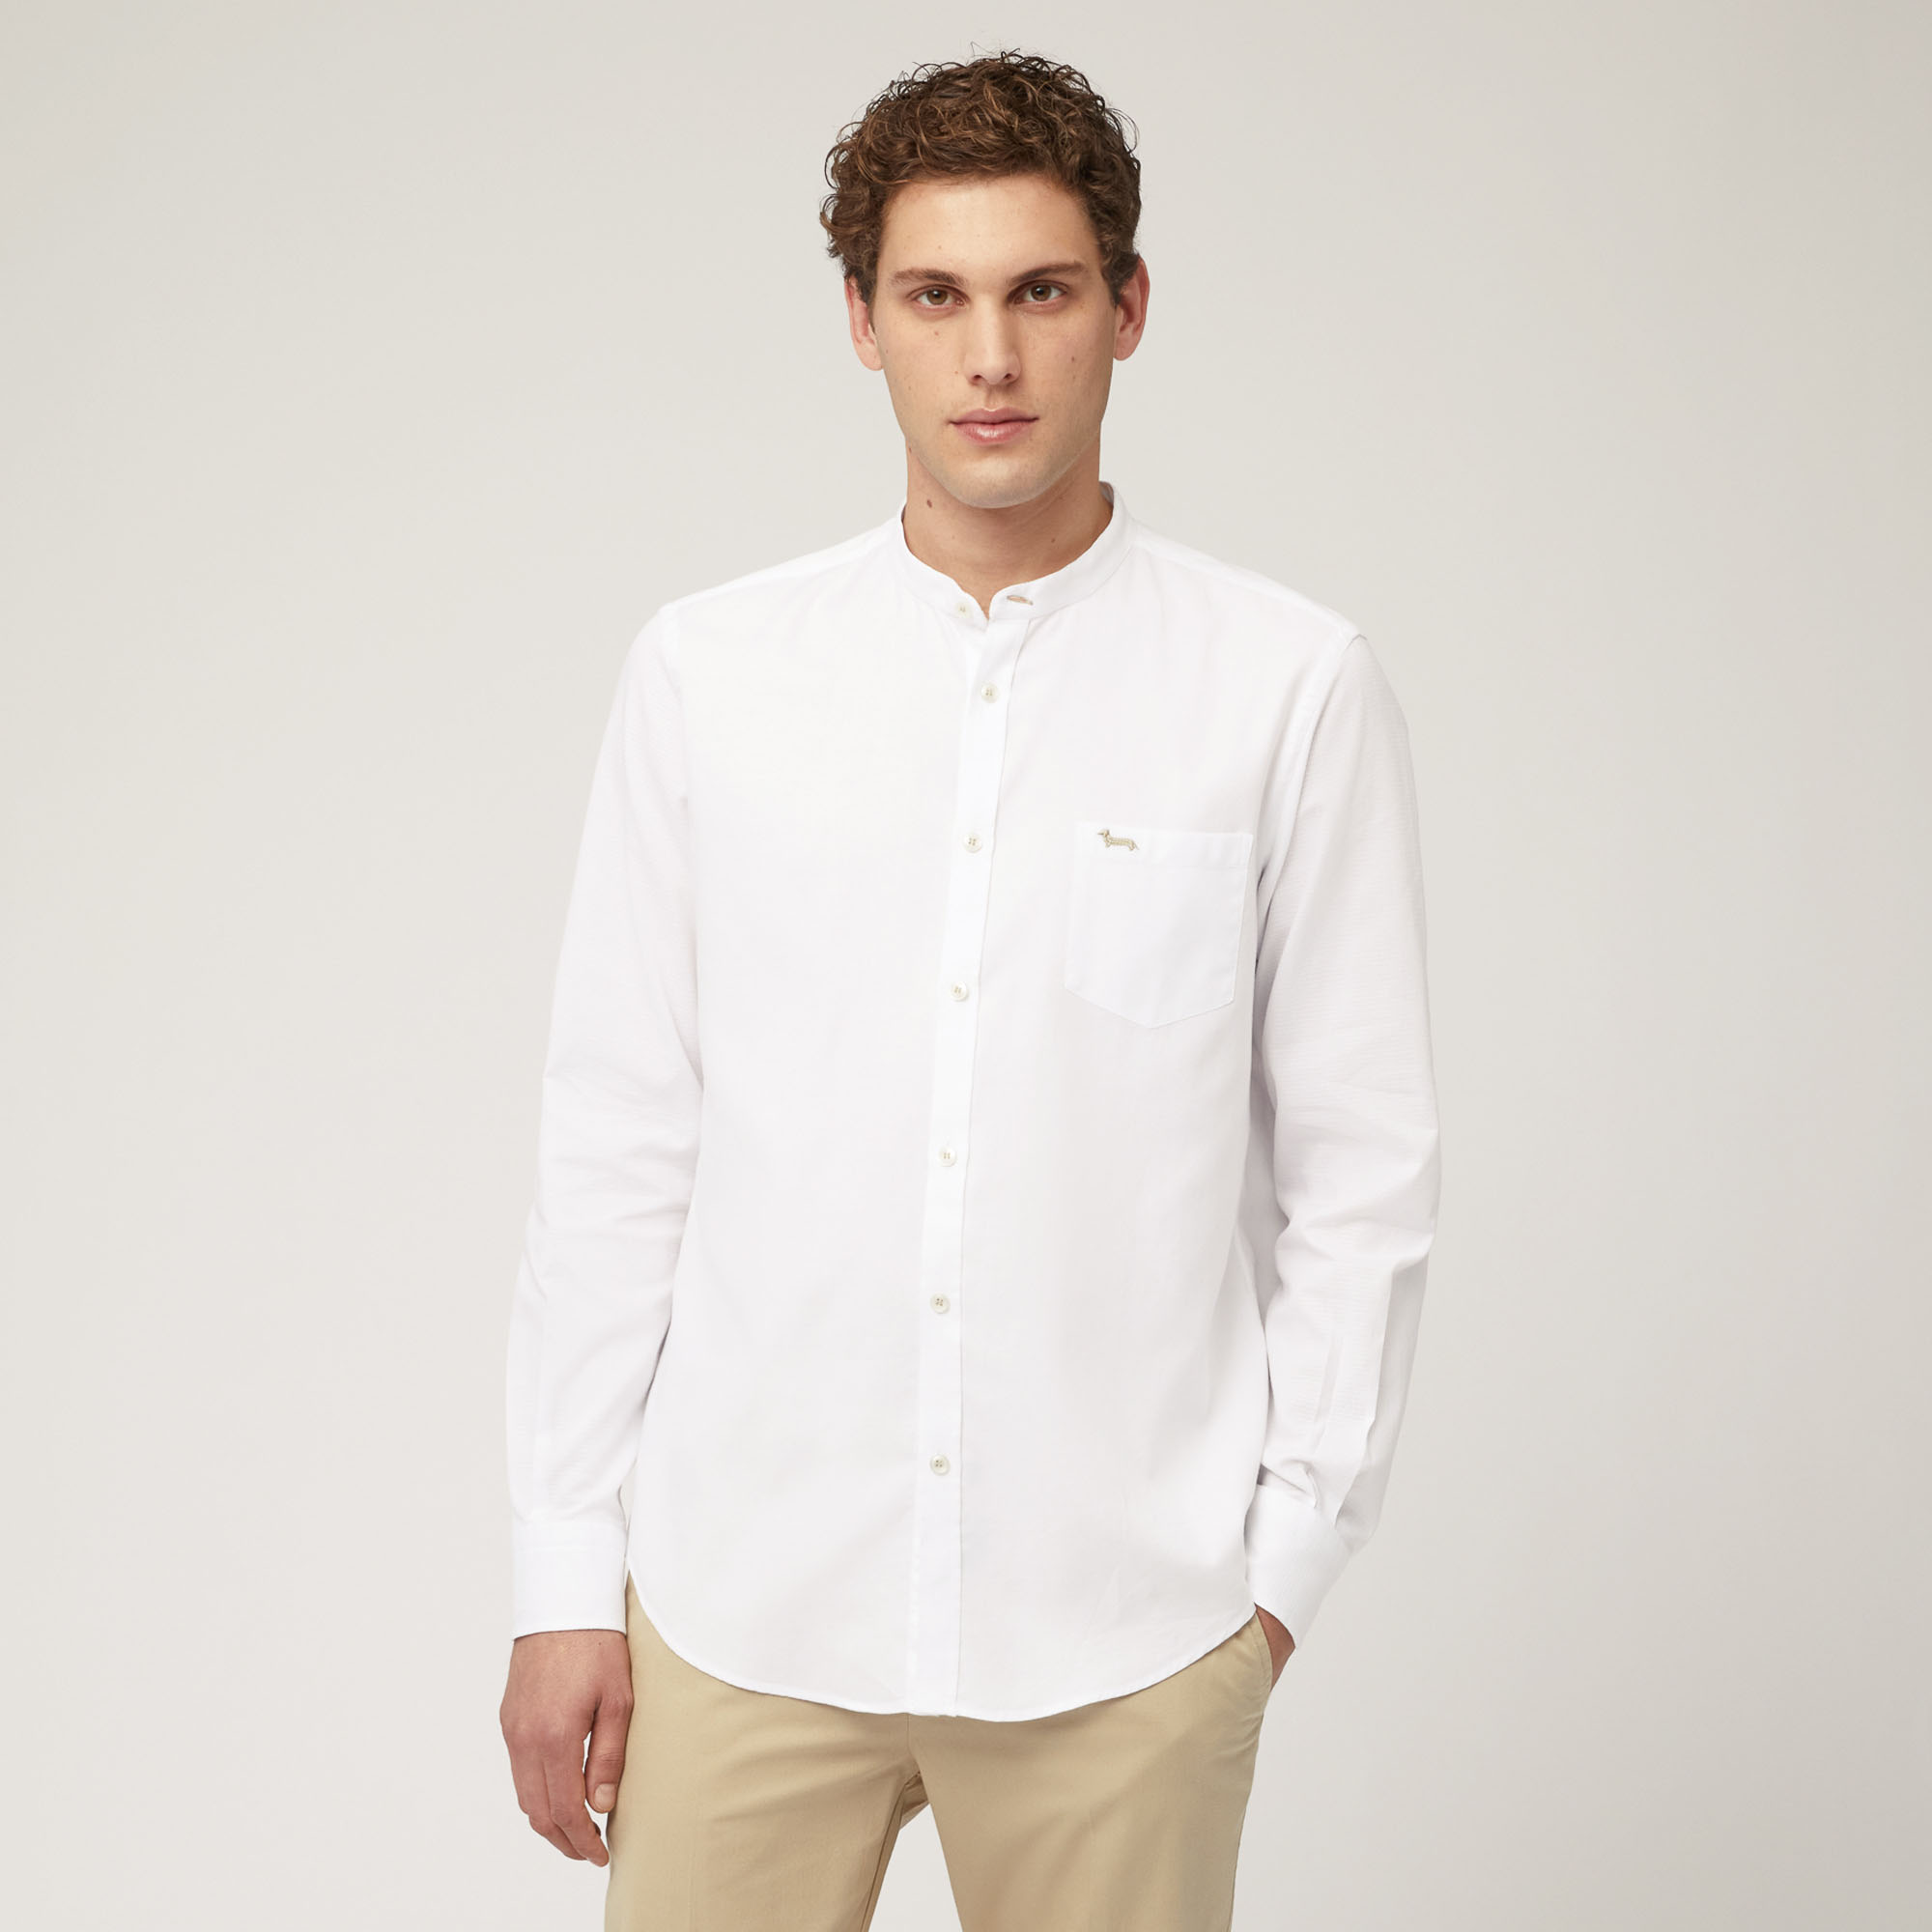 Woven Cotton Shirt with Mandarin Collar and Breast Pocket